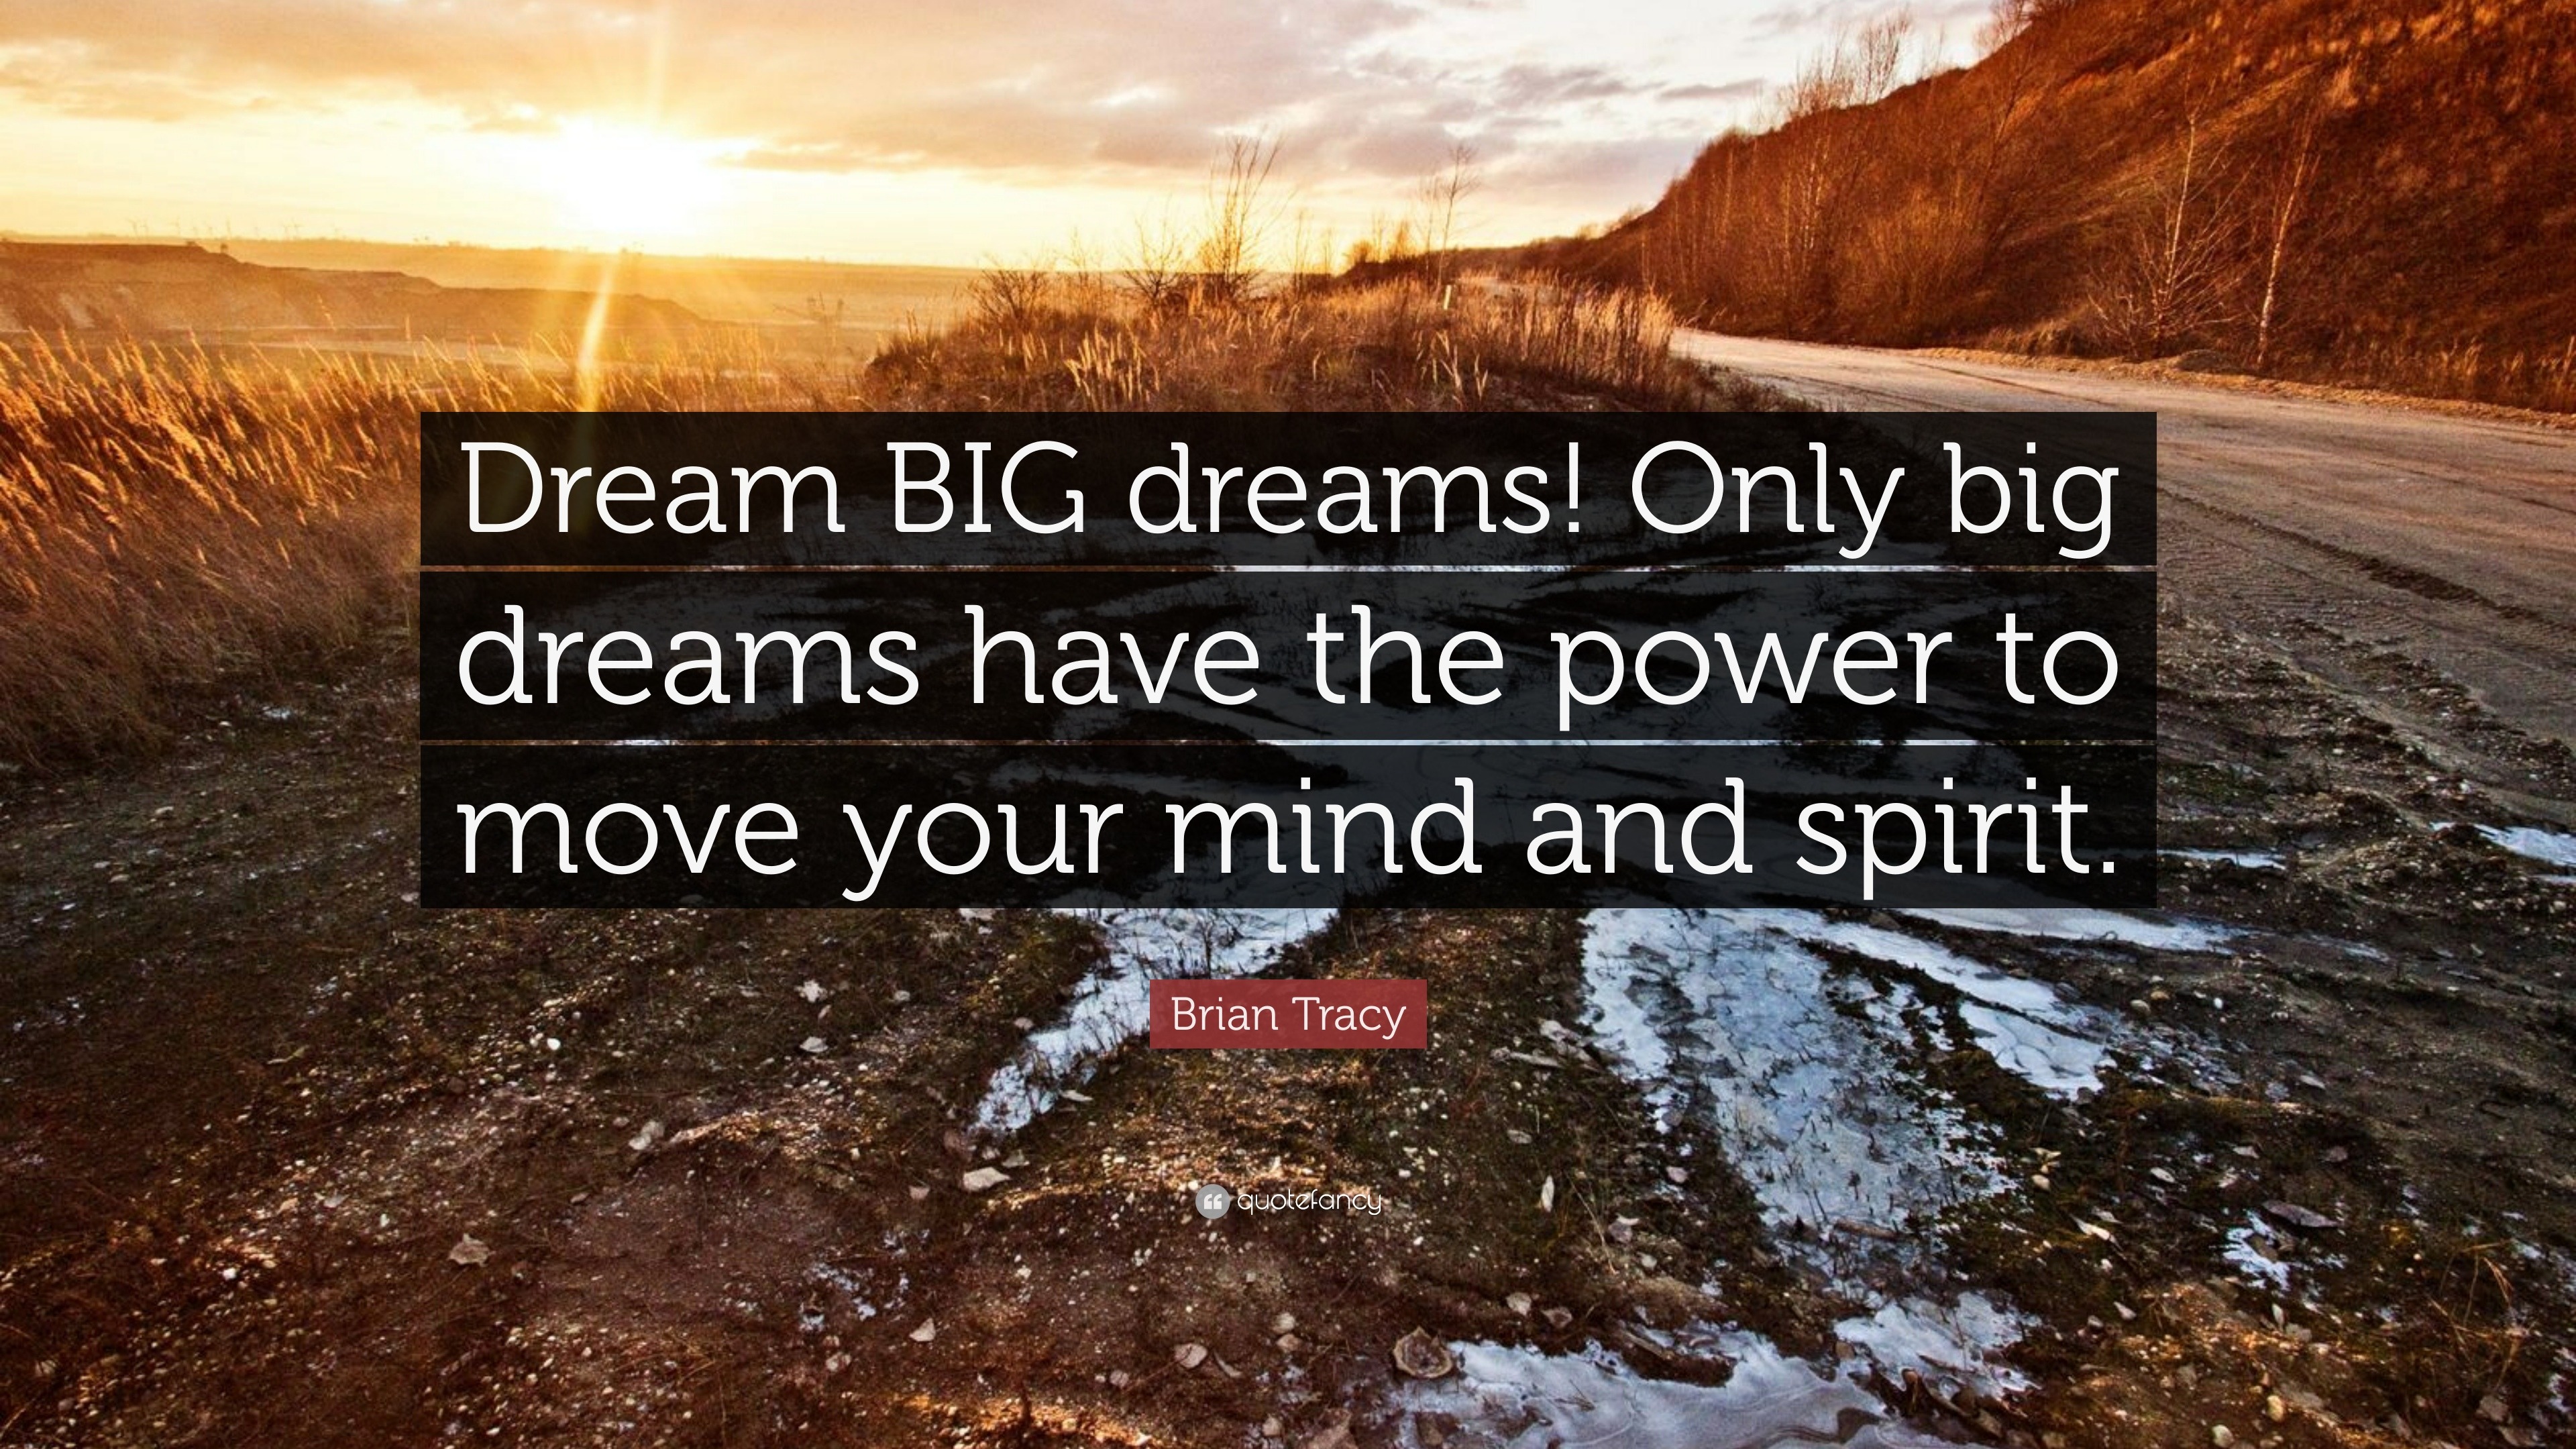 Brian Tracy Quote: “Dream BIG dreams! Only big dreams have the power to ...